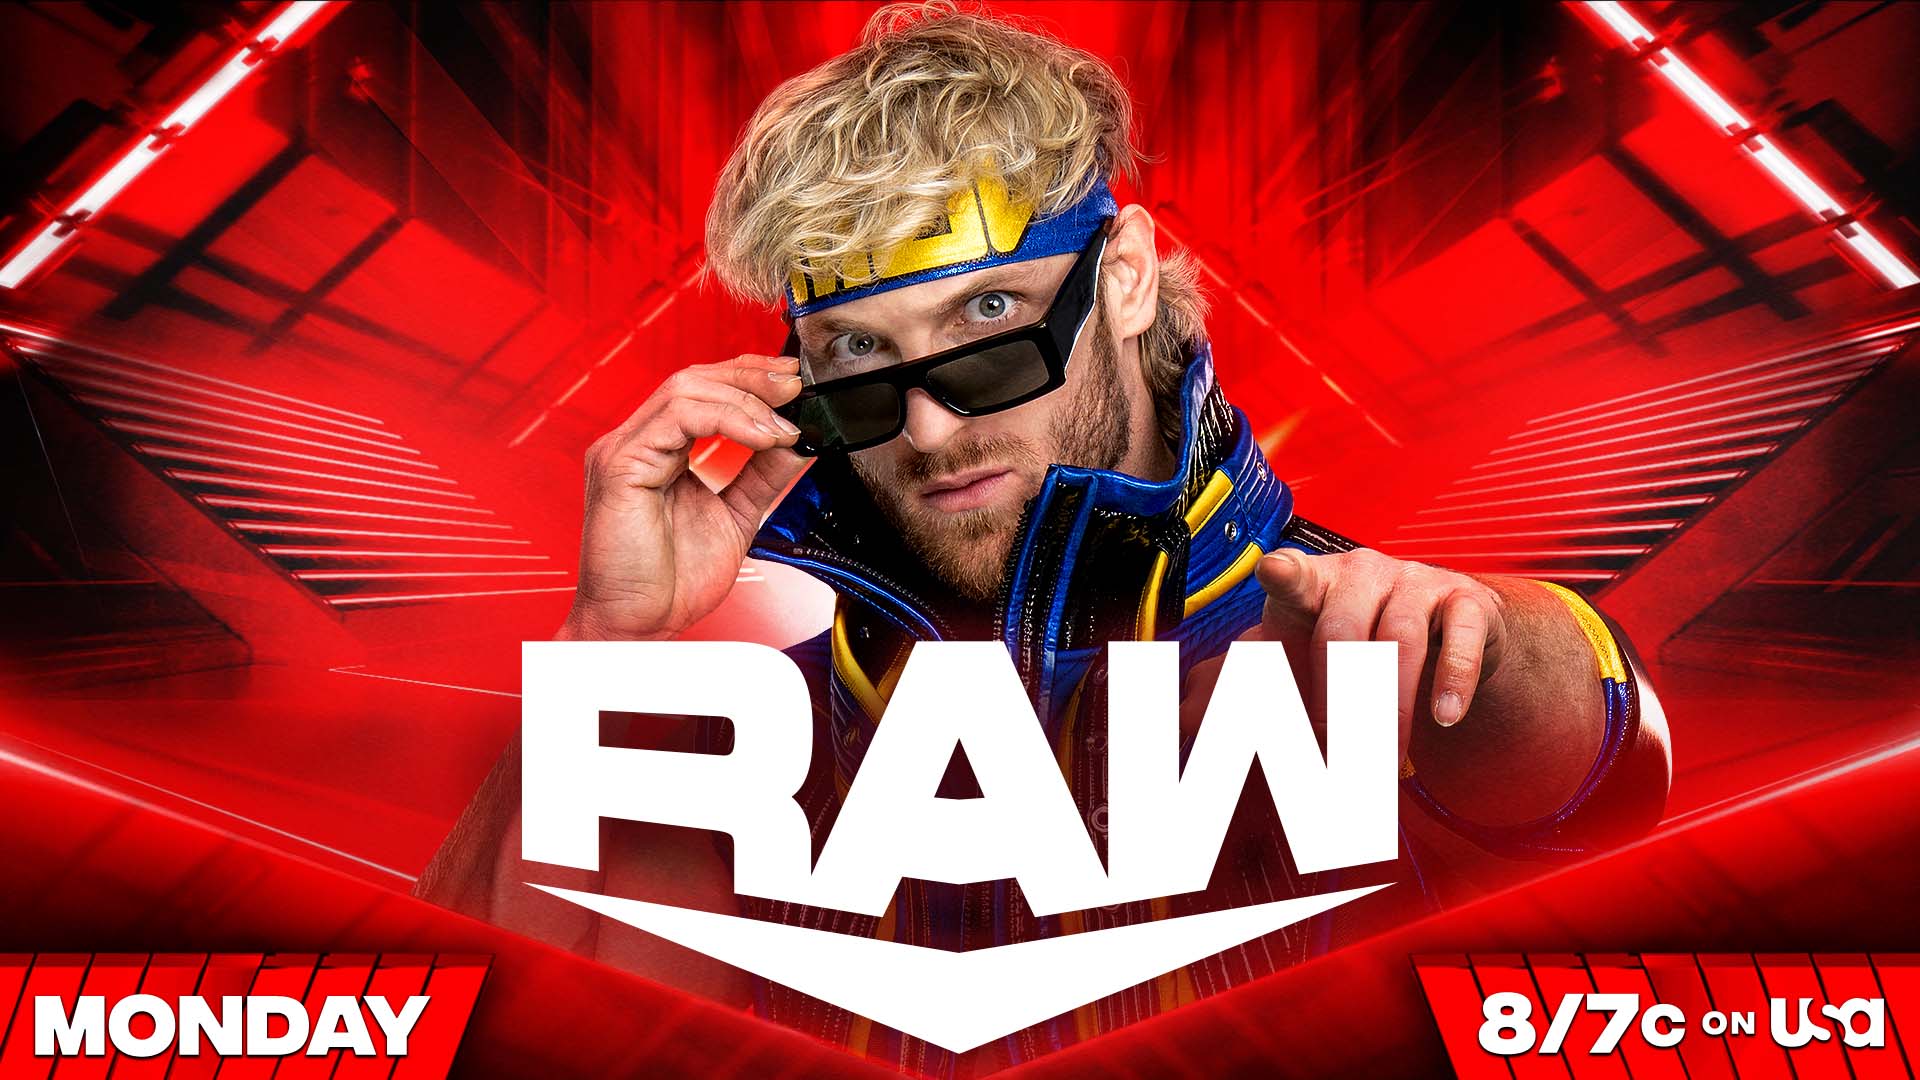 A graphic advertising Logan Paul's return to WWE Raw.